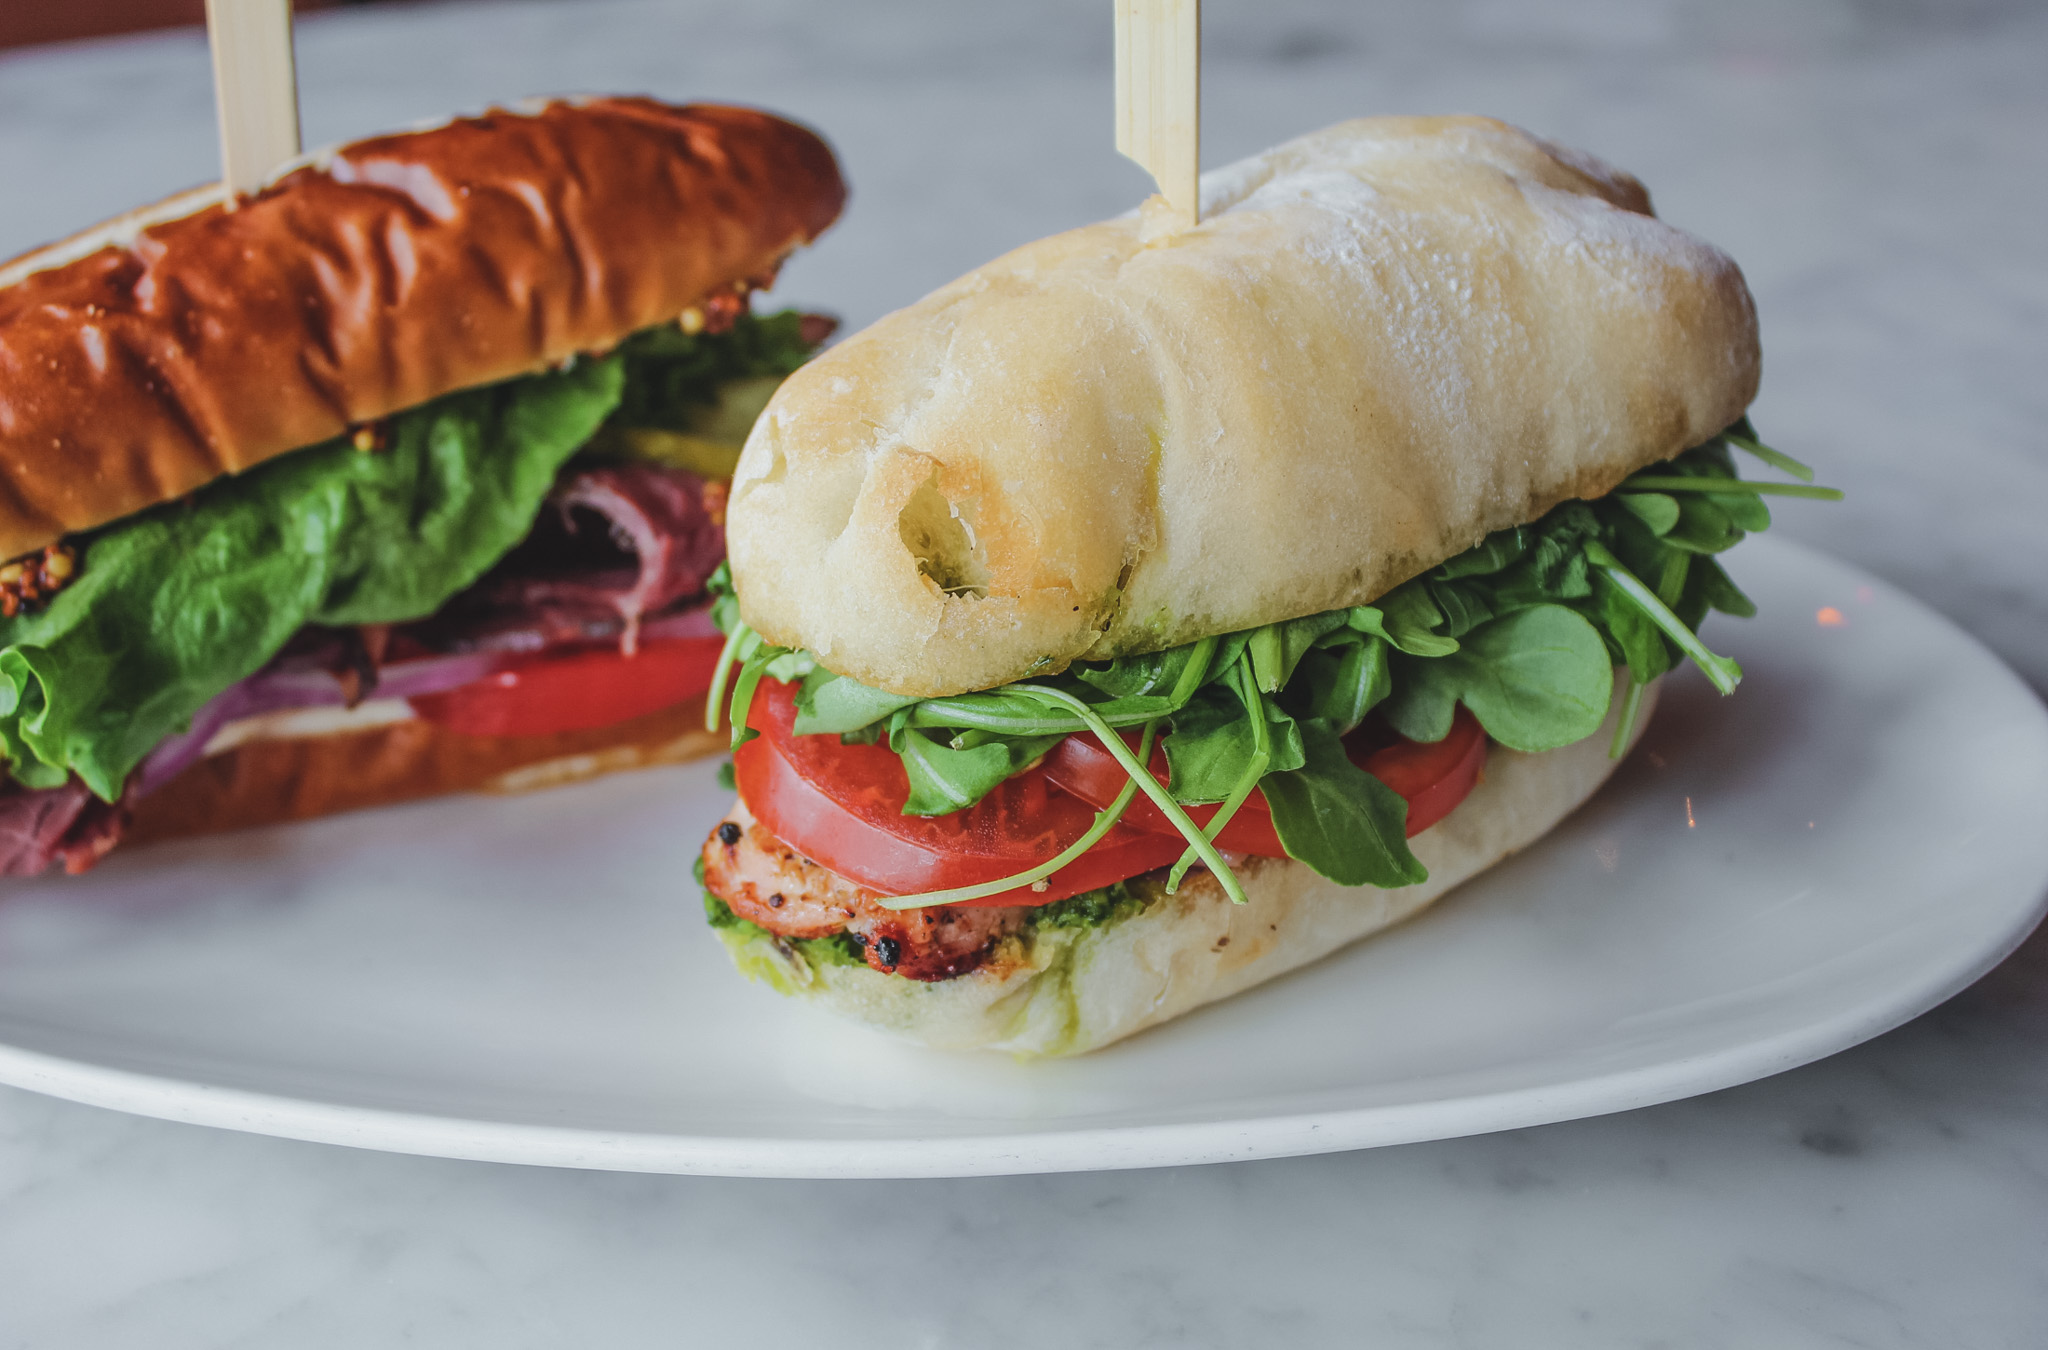 Sandwiches available for catering from Proof Kitchen + Lounge in Waterloo Ontario